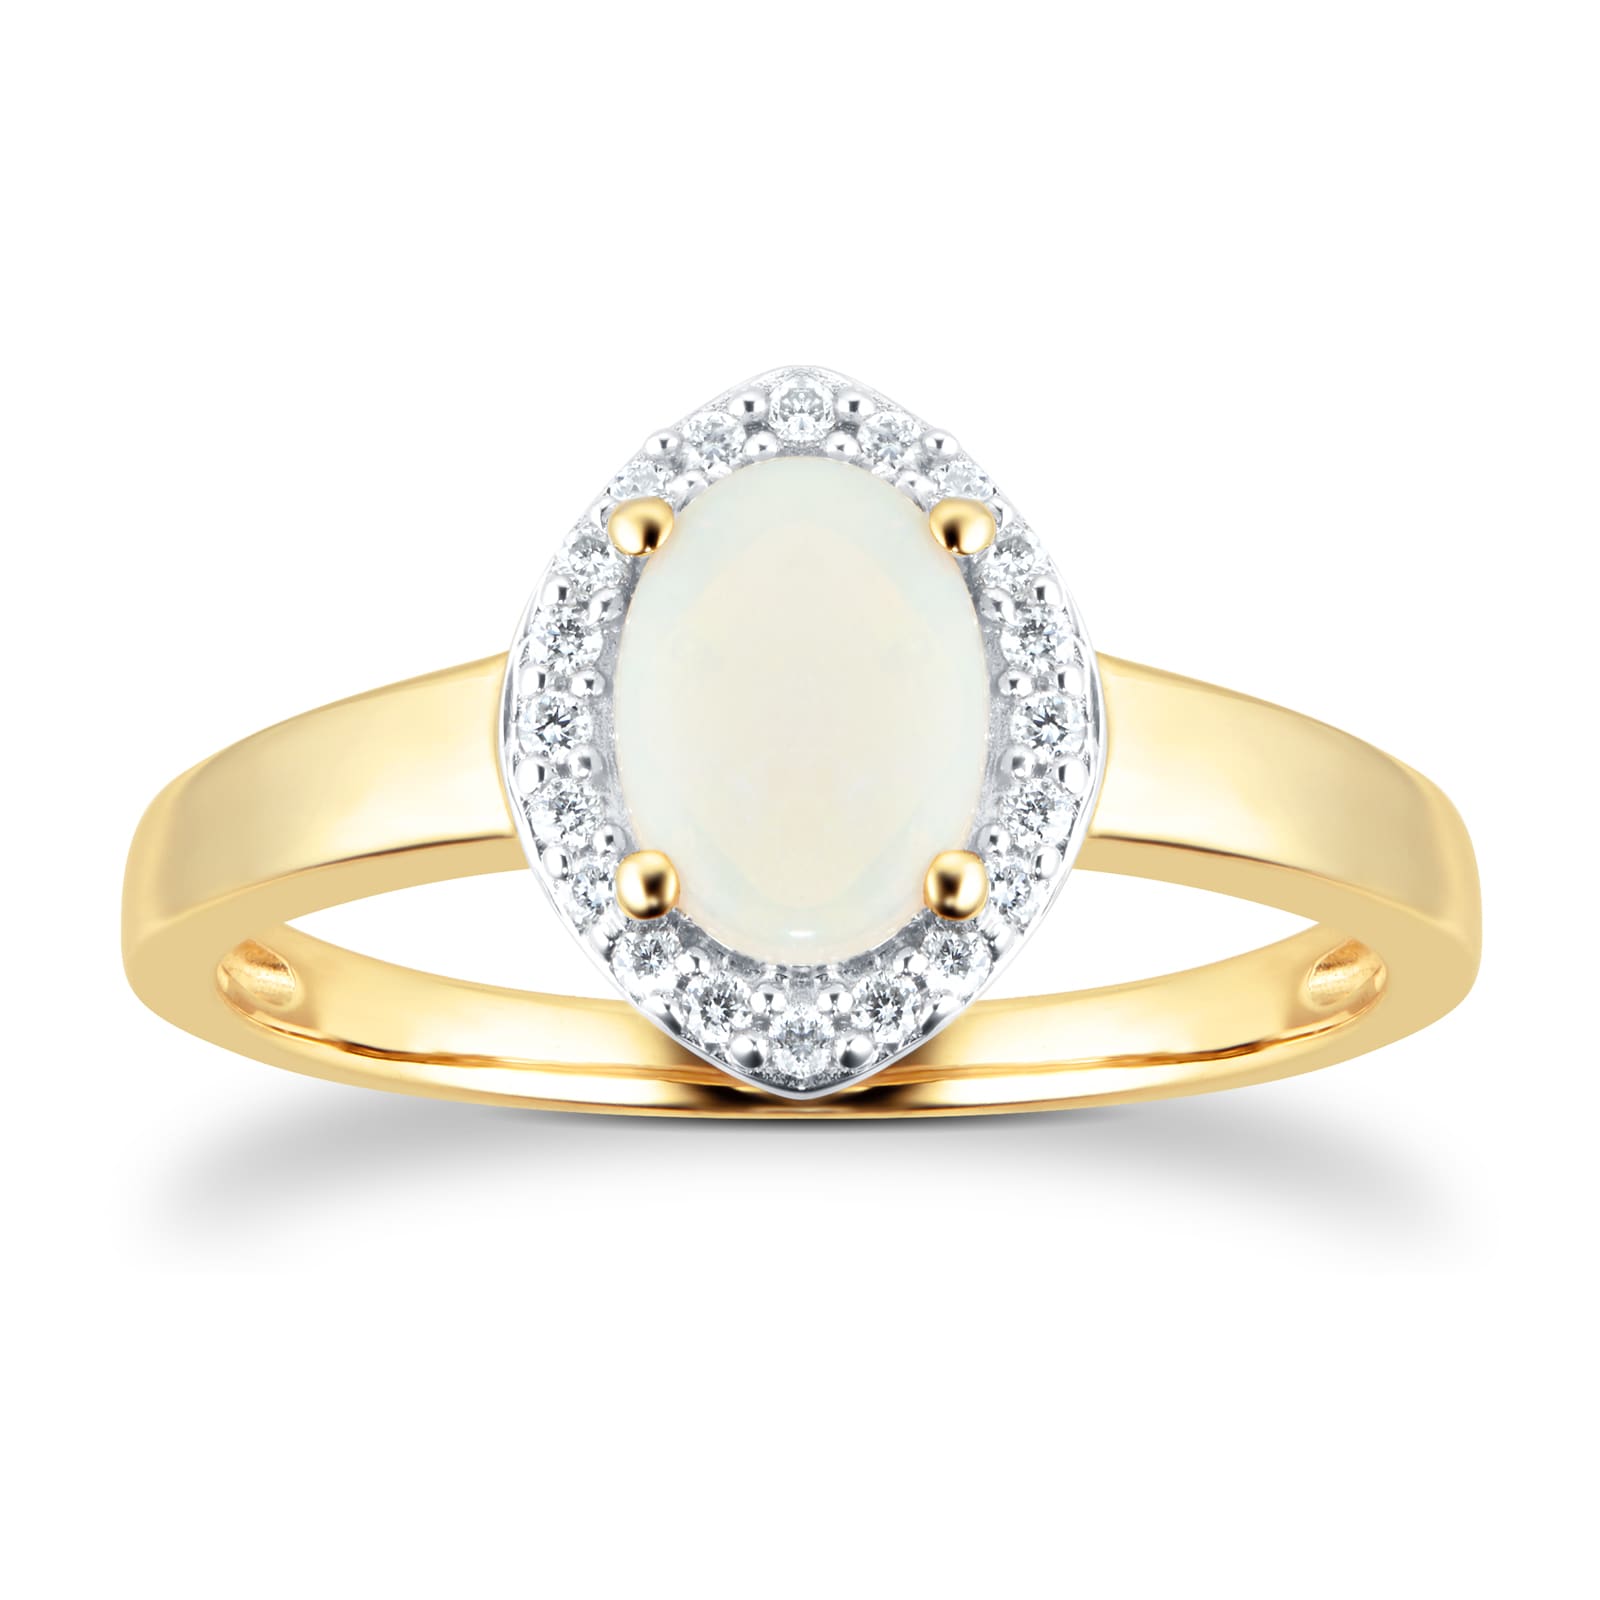 Oval Cut Opal And Diamond Set Ring In 9 Carat Yellow Gold - Ring Size J